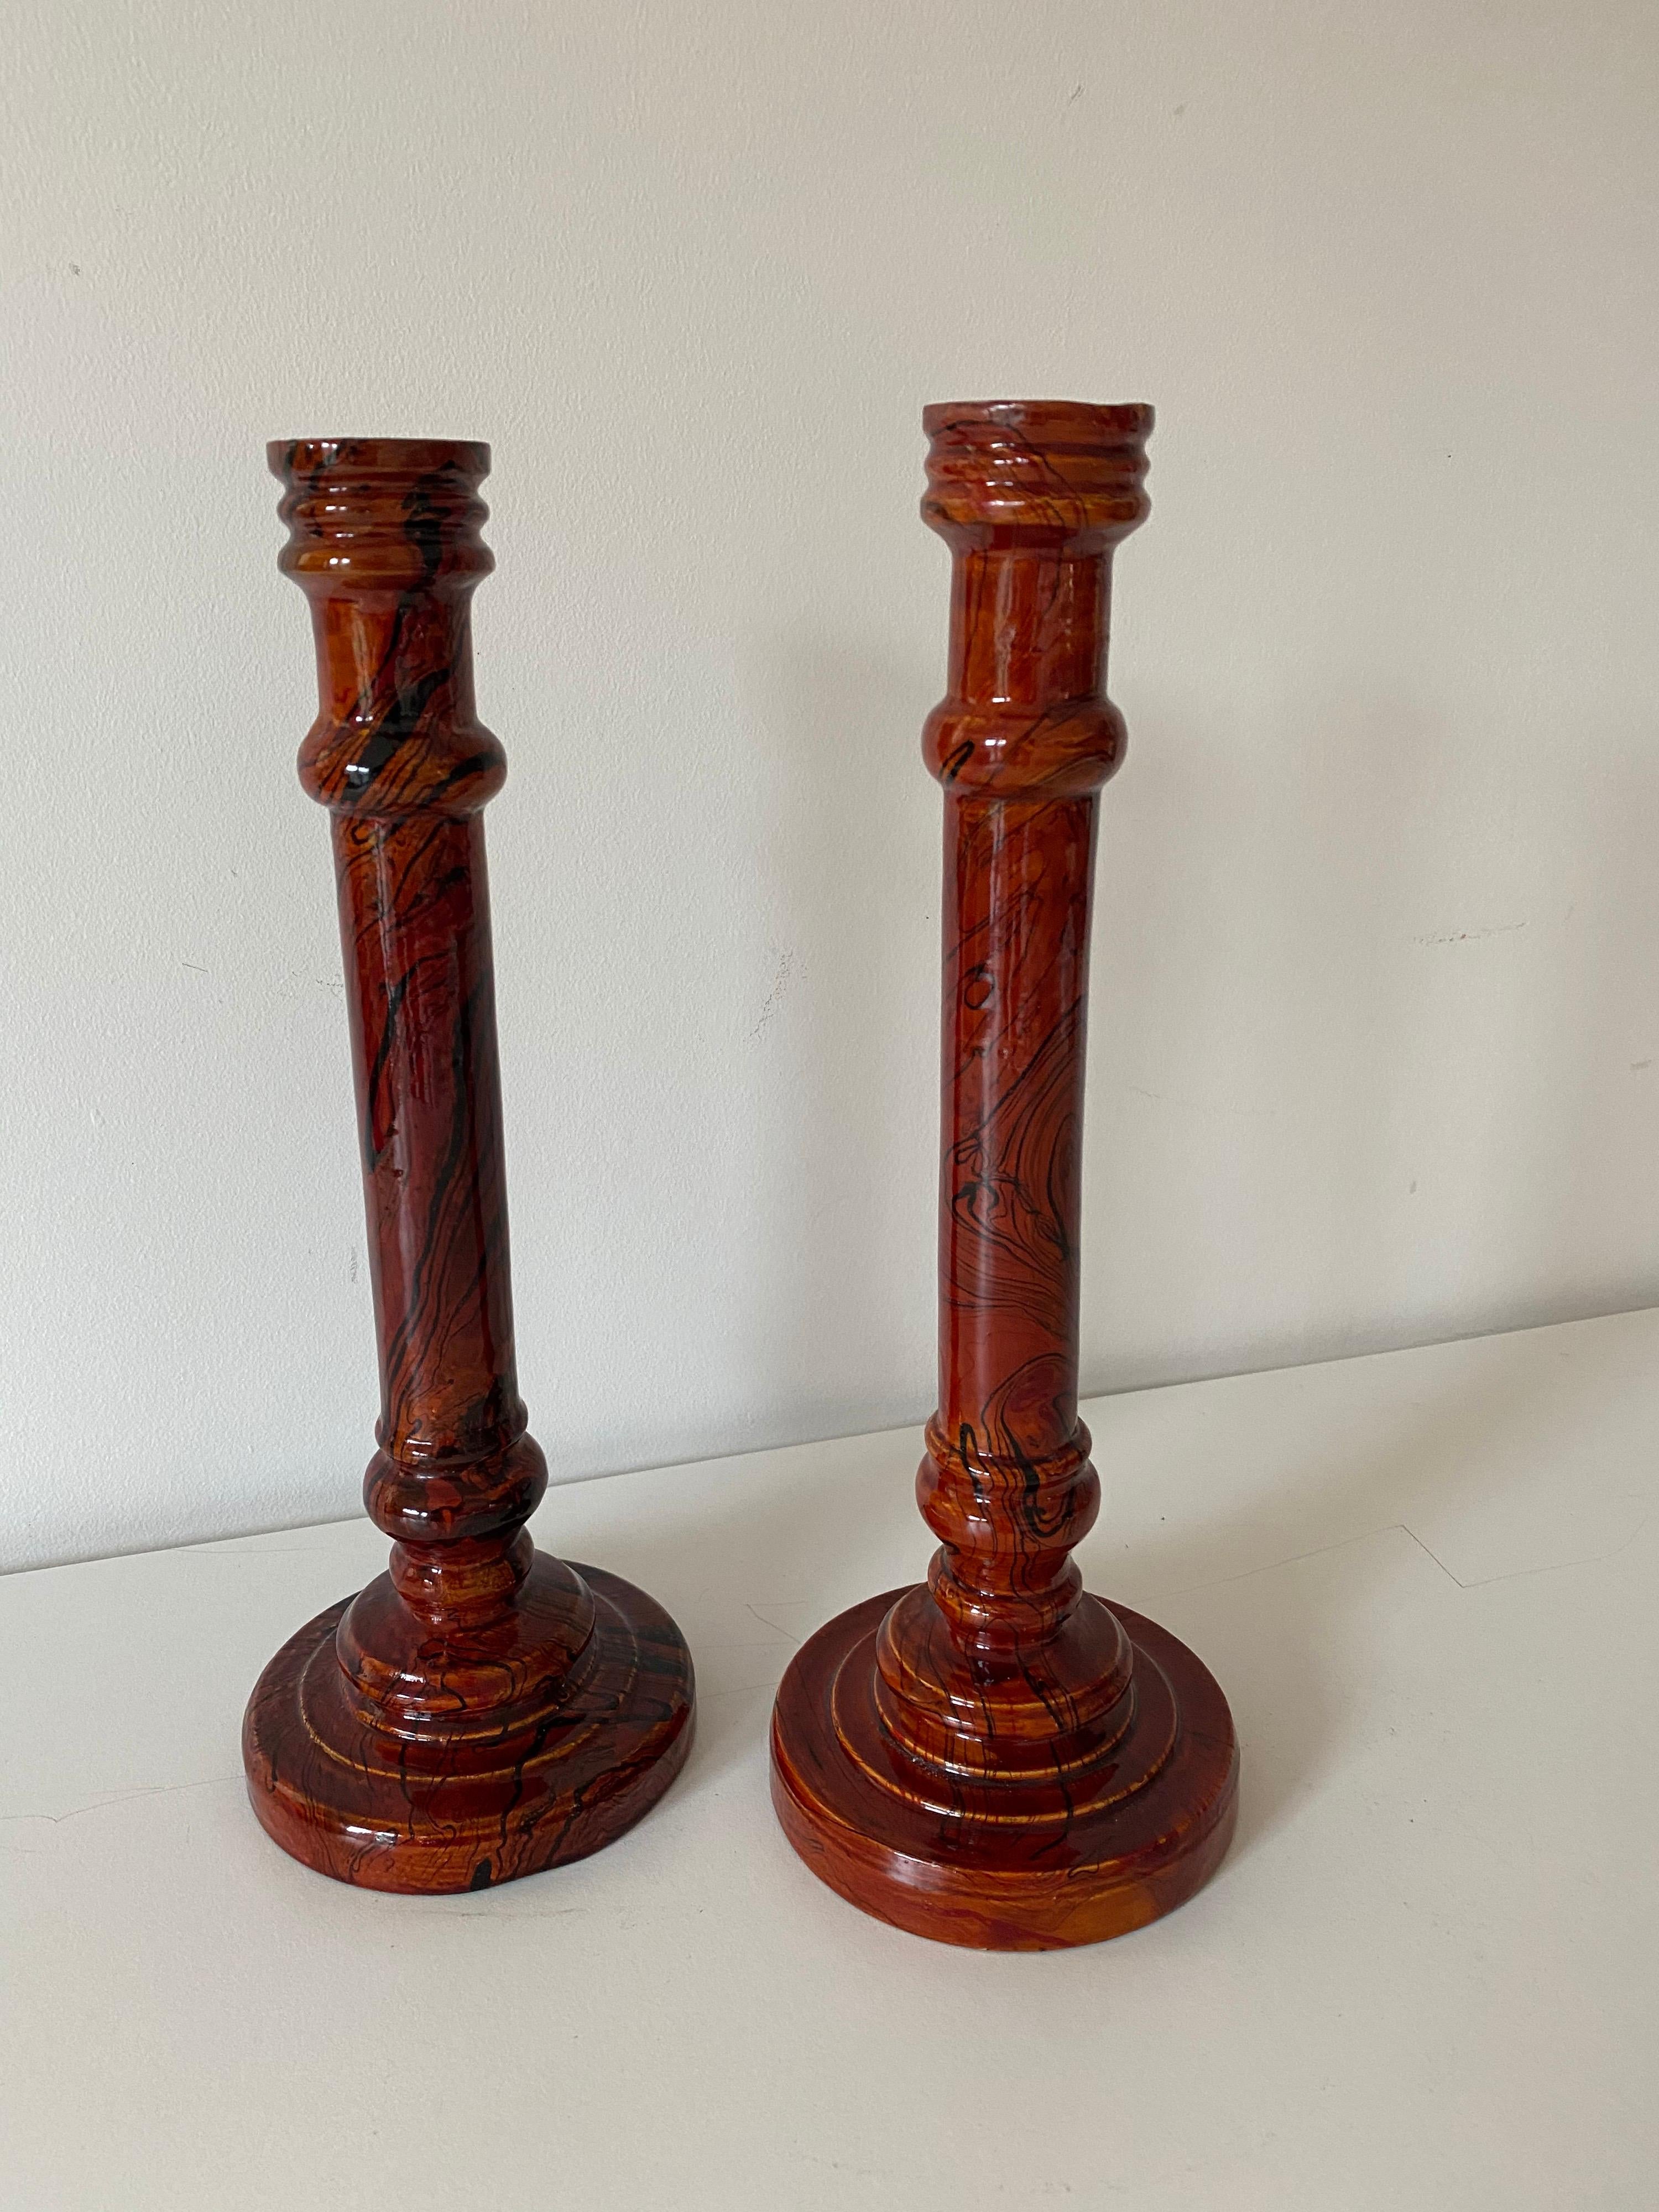 A pair of vintage marbled wood candlesticks.